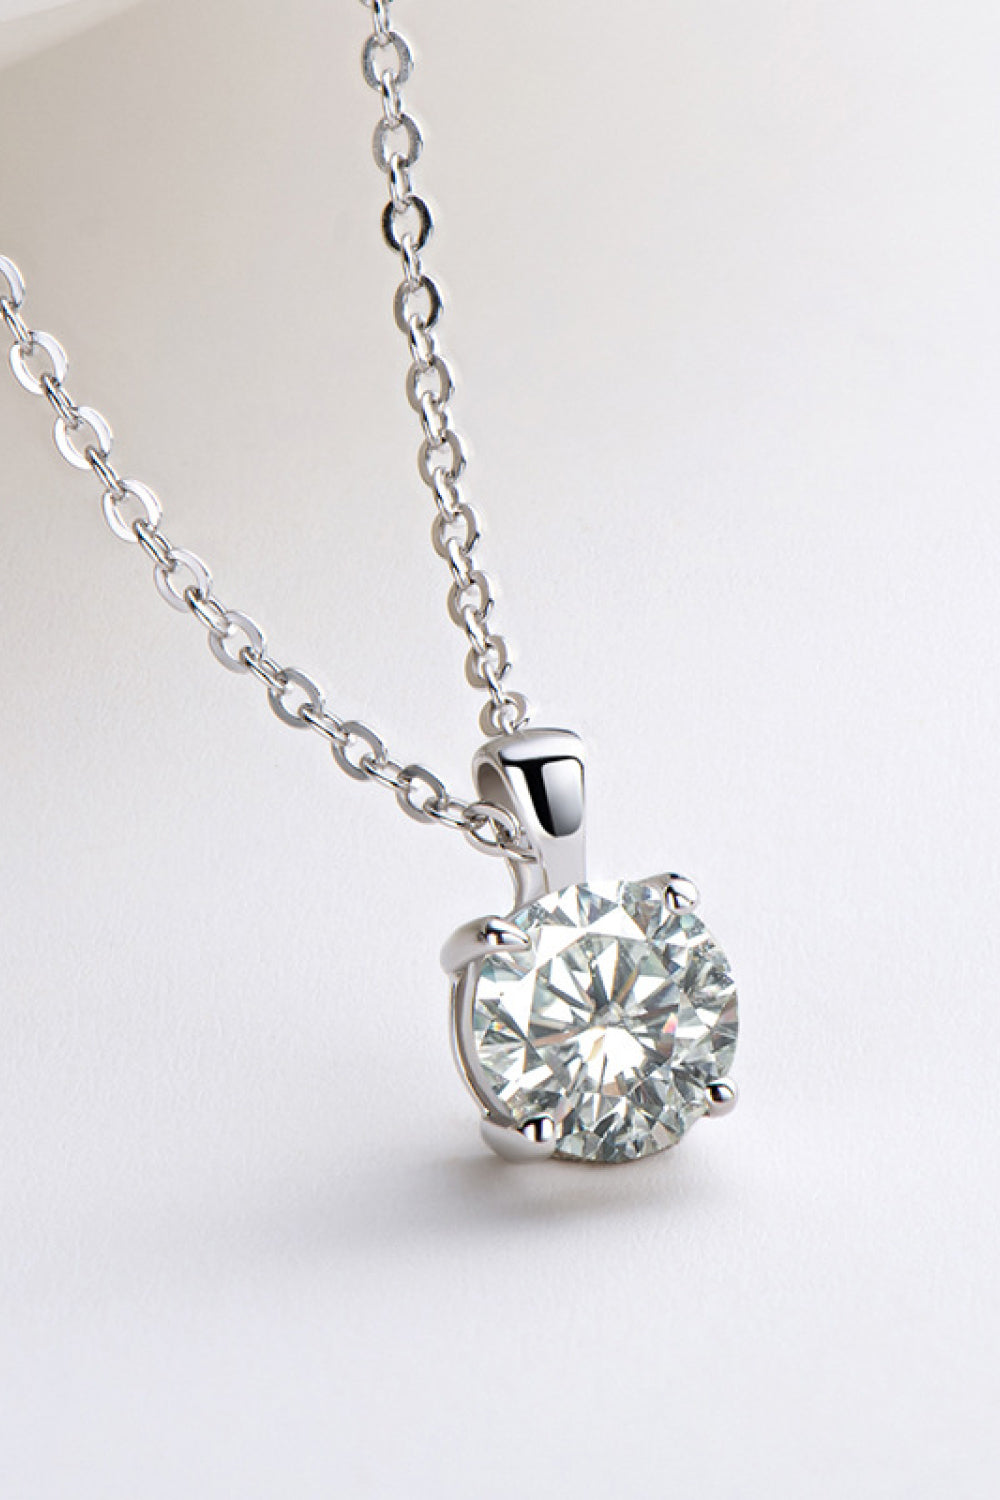 Moissanite Chain-Link Necklace Image4